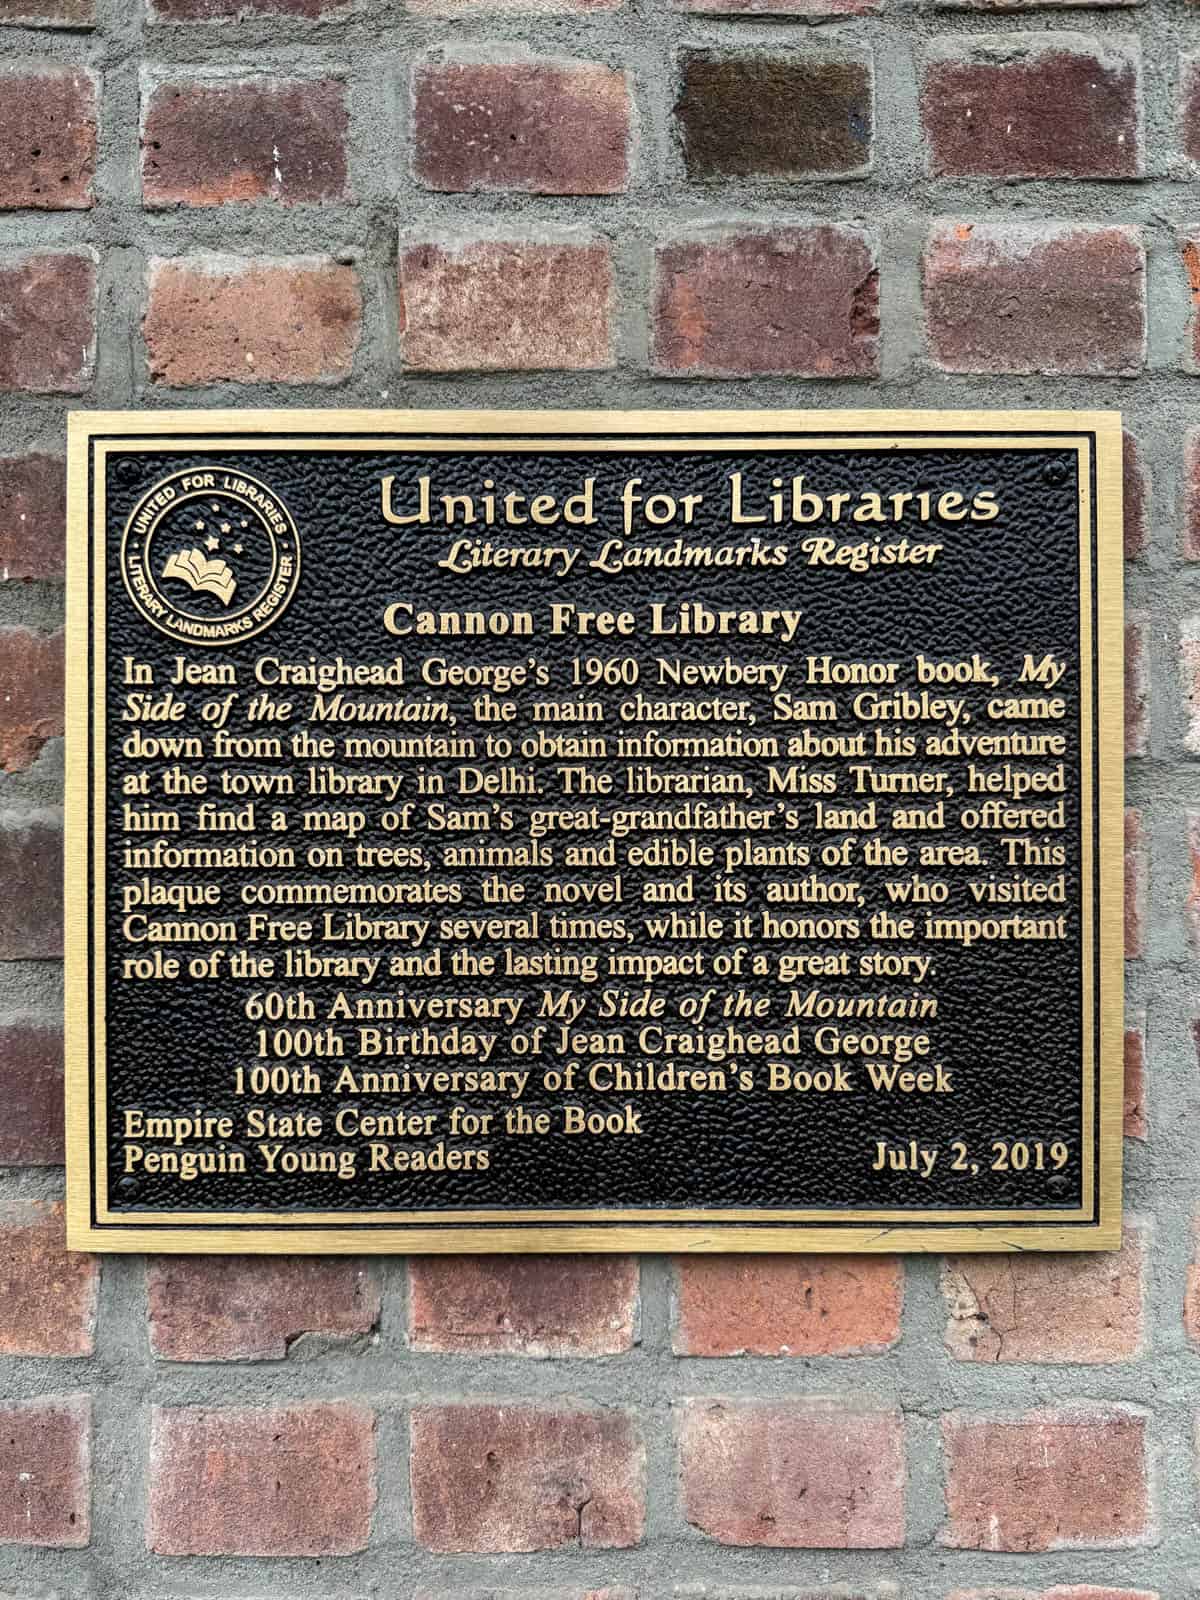 A plaque on the front of the Cannon Free Library.